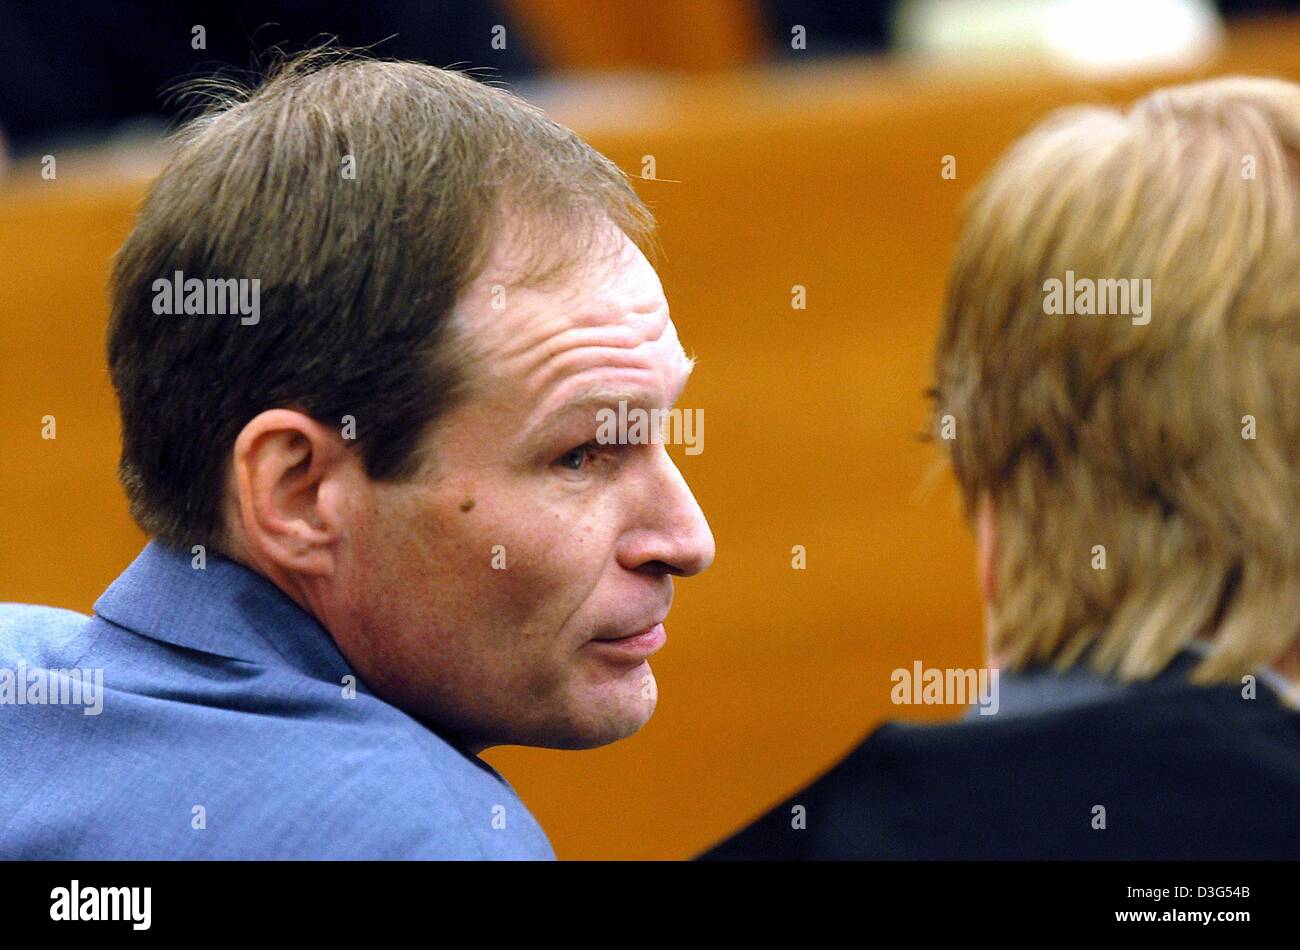 (dpa) - 42-year-old German computer specialist Armin Meiwes looks at his lawyer during the second day of his trial at the district court in Kassel, Germany, 8 December 2003. The court was set to view video tapes showing how the self-declared cannibal killed, cut up and ate his victim. The second day of the murder trial of Meiwes began with evidence to be given by police who visited Stock Photo